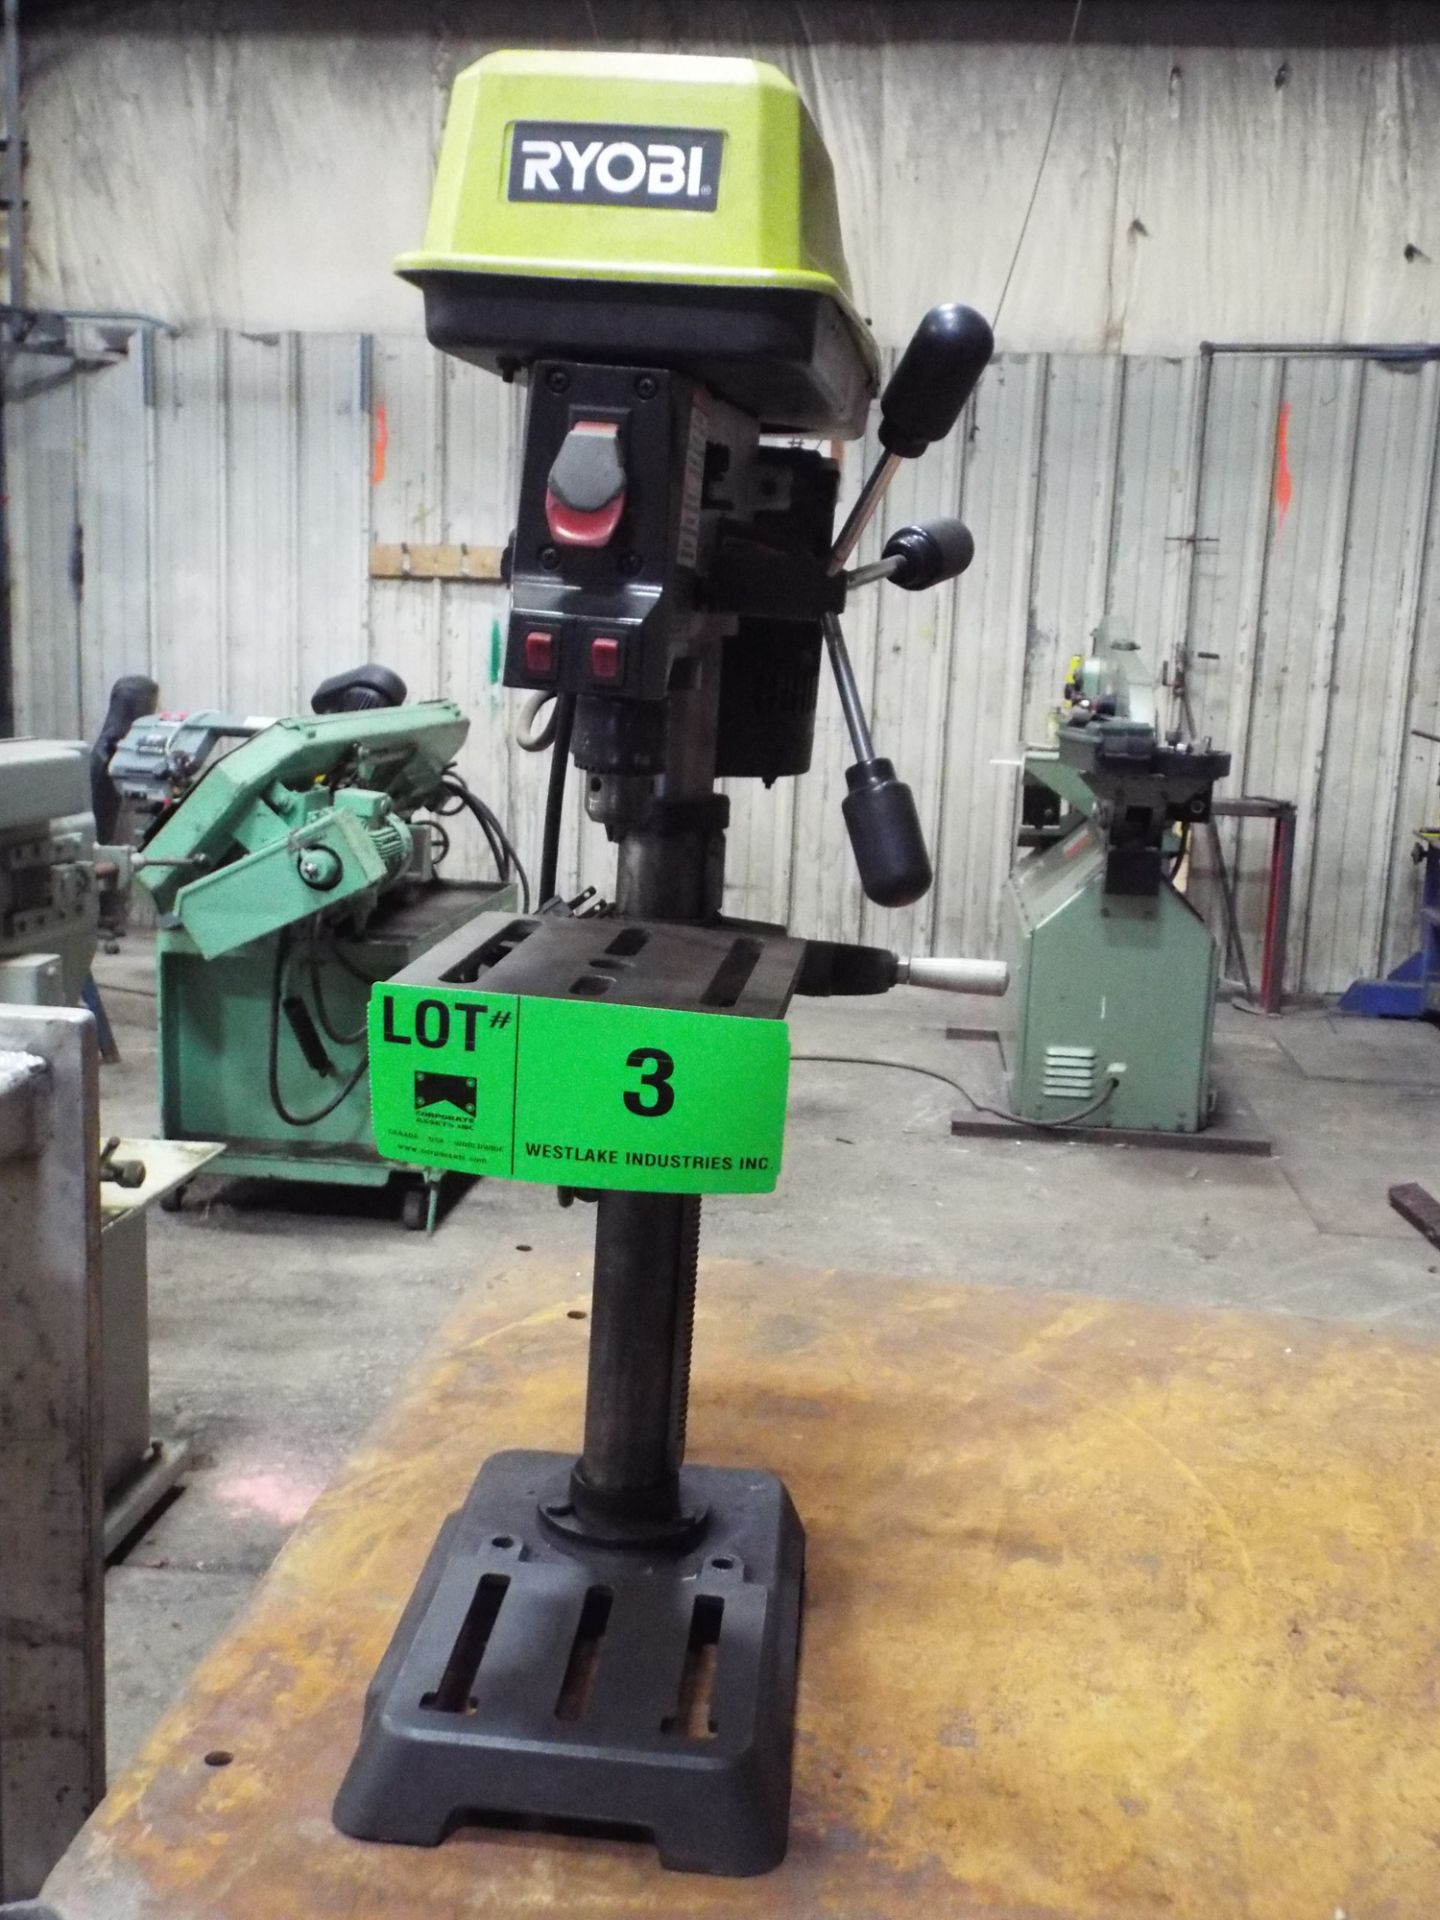 RYOBI DP103L 10" BENCH TYPE DRILL PRESS WITH LASER, S/N: N/A